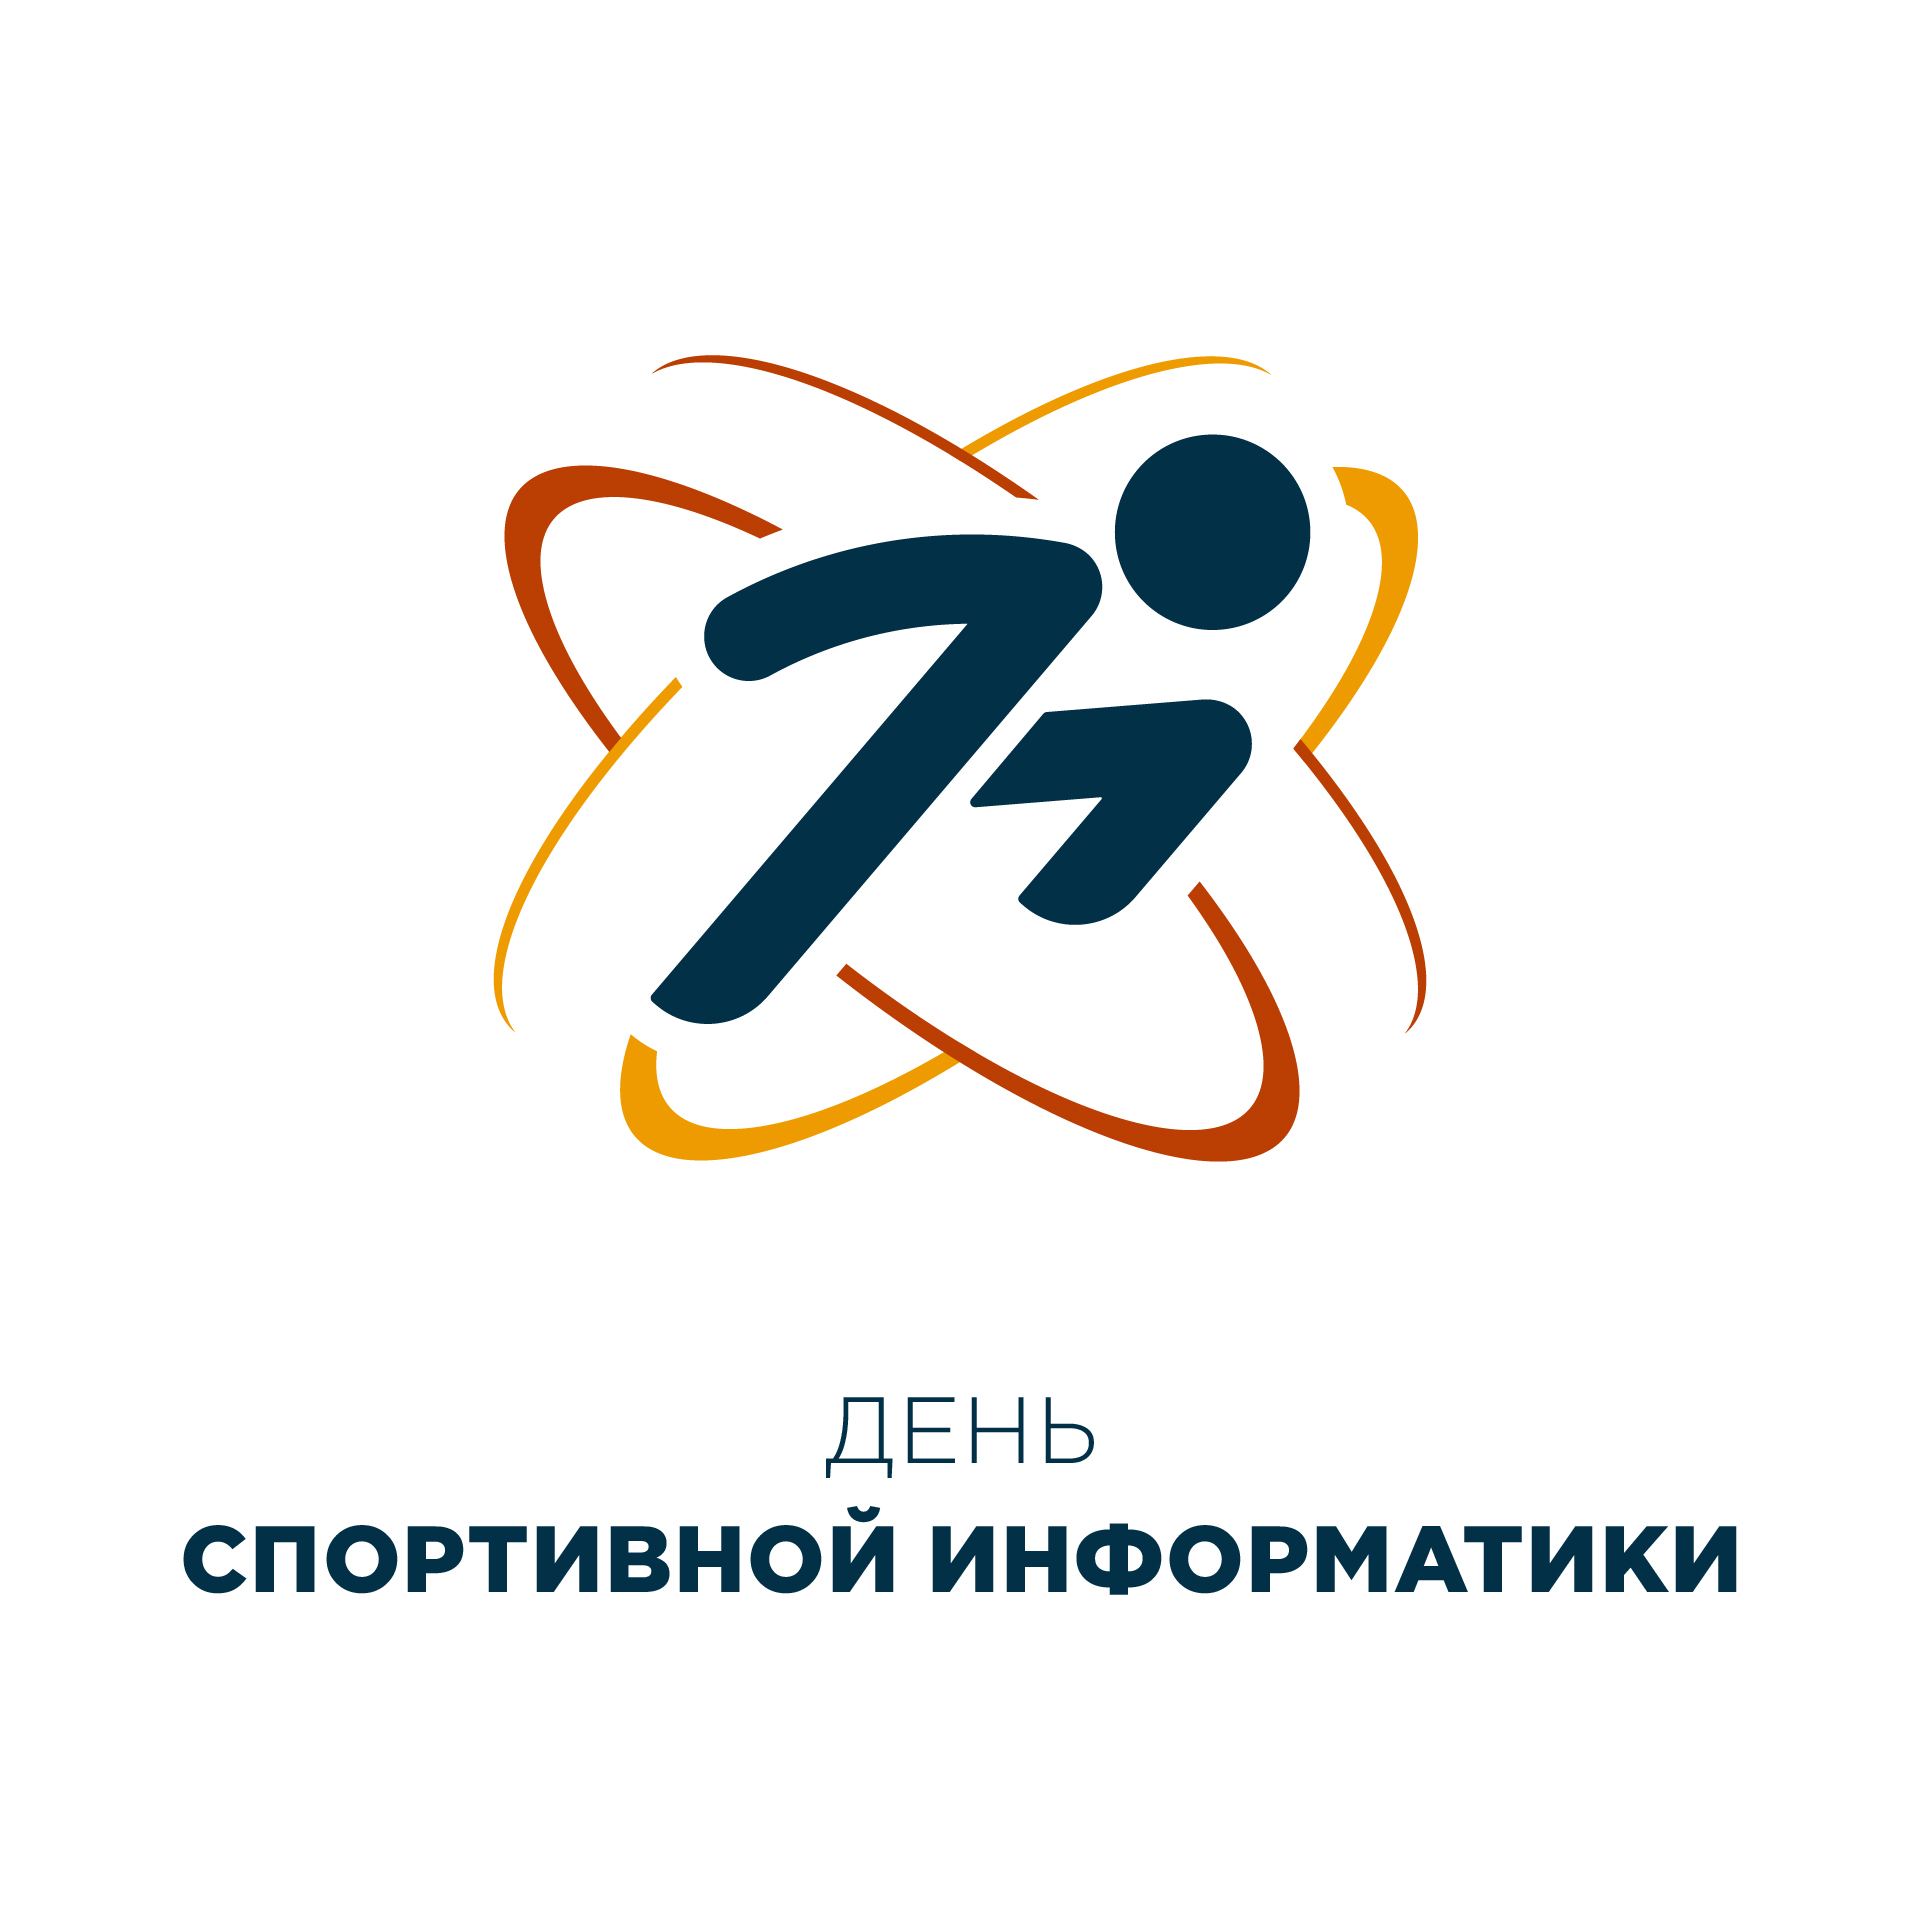 VII All-Russian scientific and practical conference with international participation 